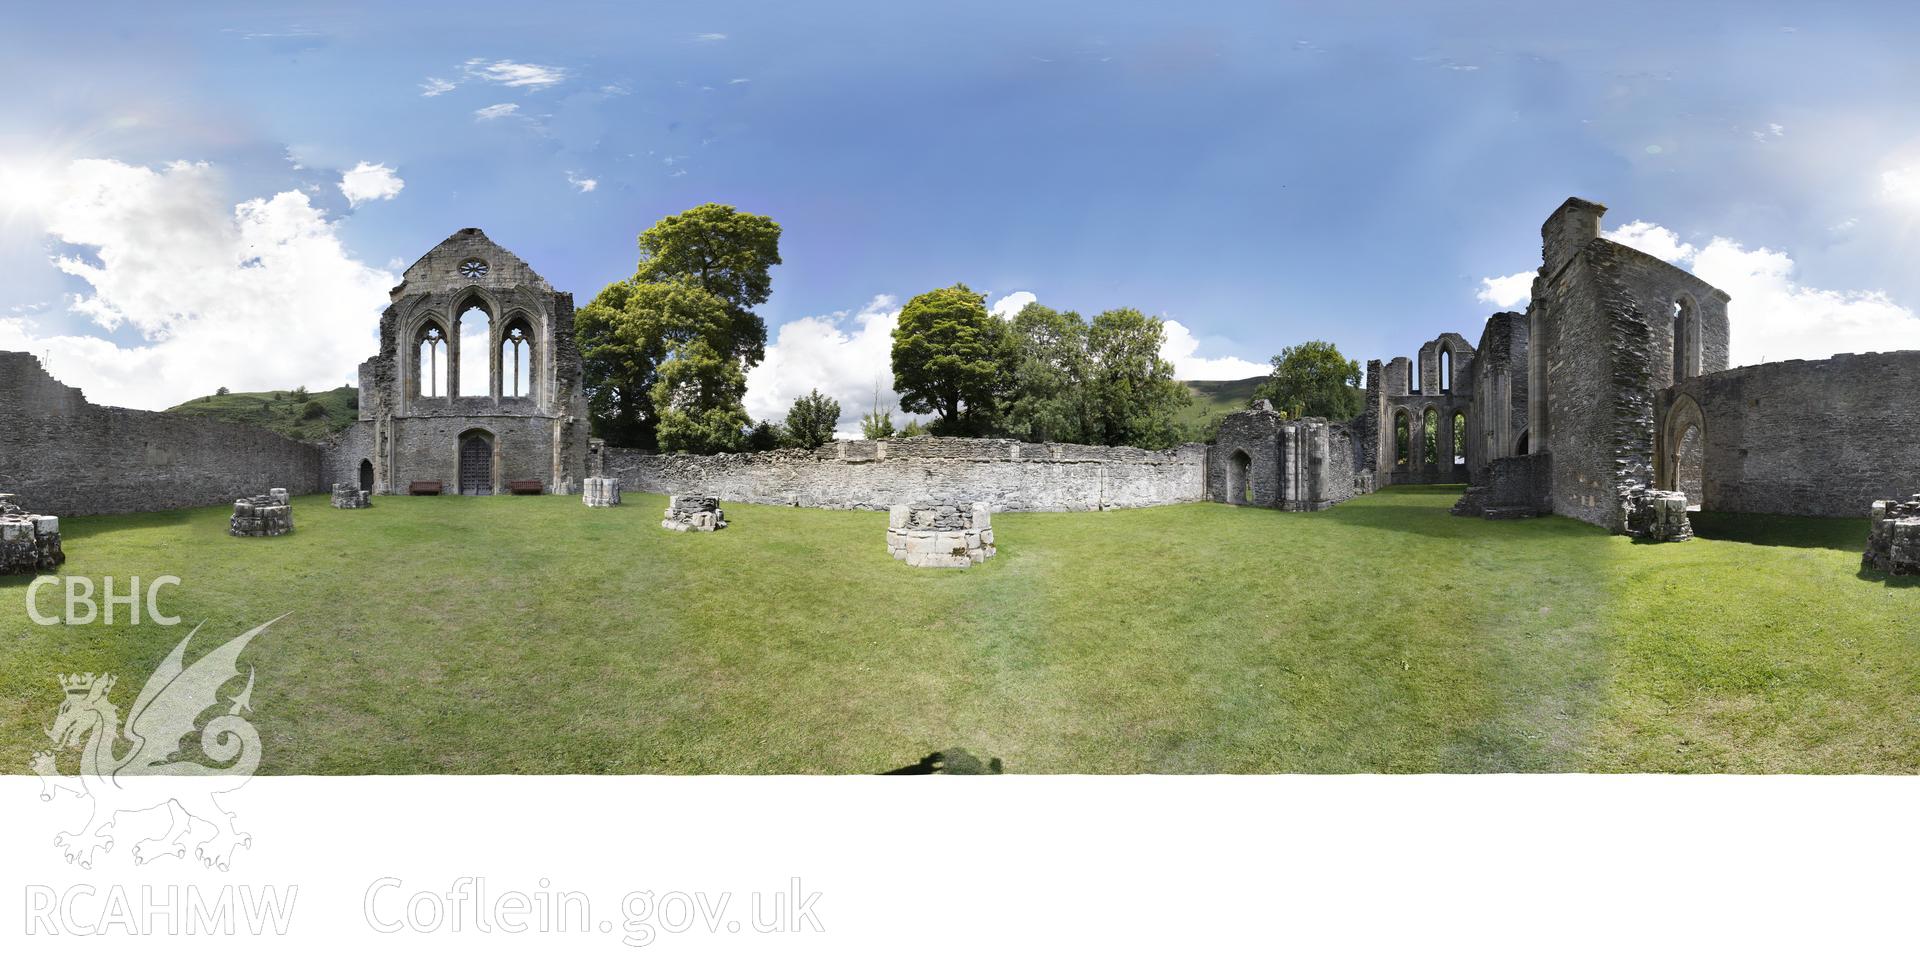 Reduced resolution .tiff file of stitched images in the west end of the abbey church at Valle Crucis Abbey, carried out by Sue Fielding and Rita Singer, July 2017. Produced through European Travellers to Wales project.